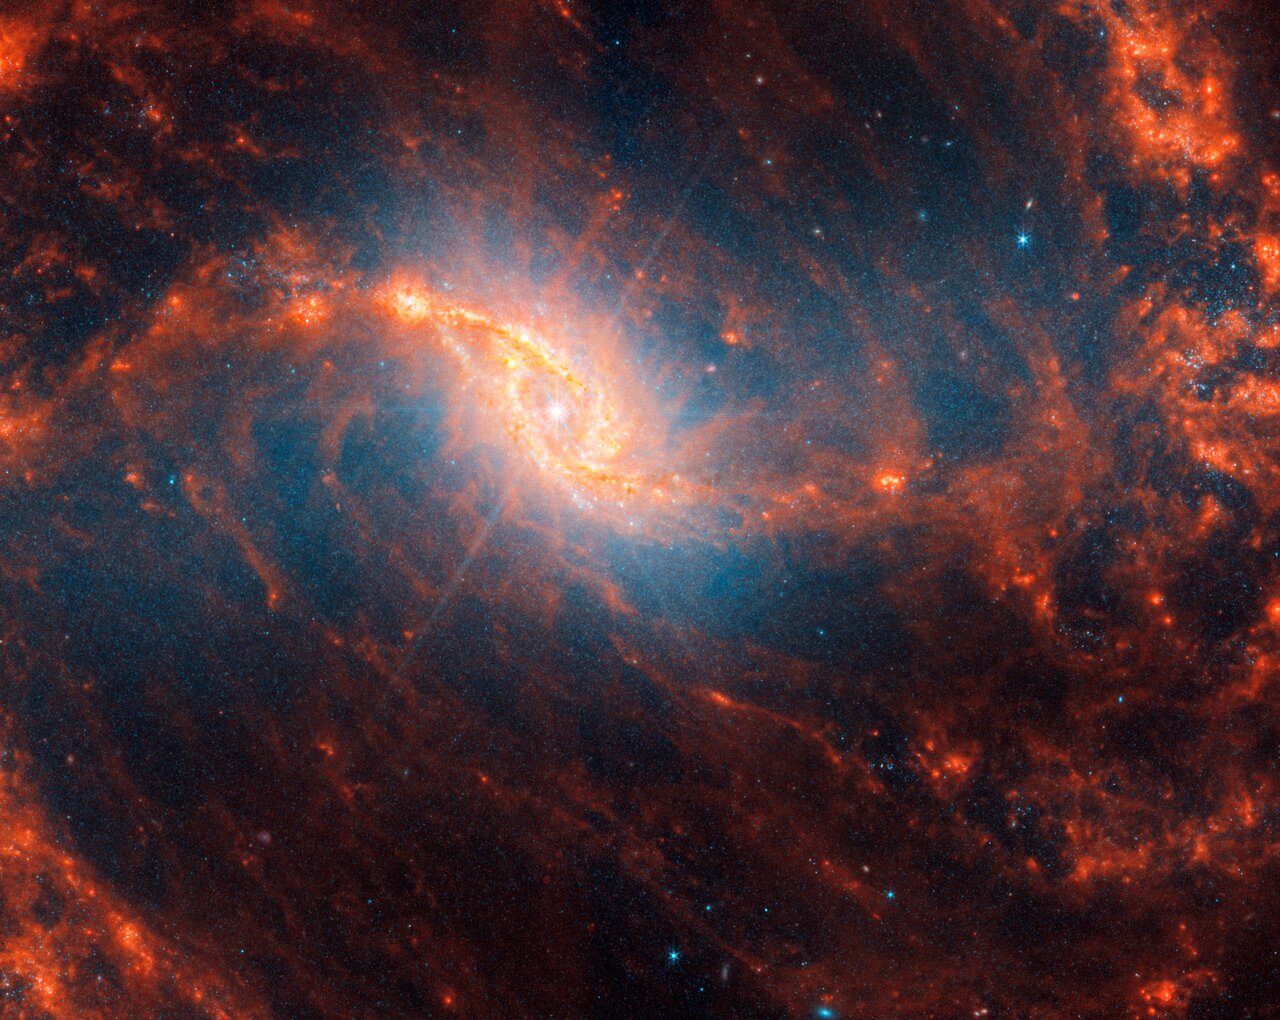 Spiral galaxy NGC 1365, located 56 million light-years away in the Fornax constellation.